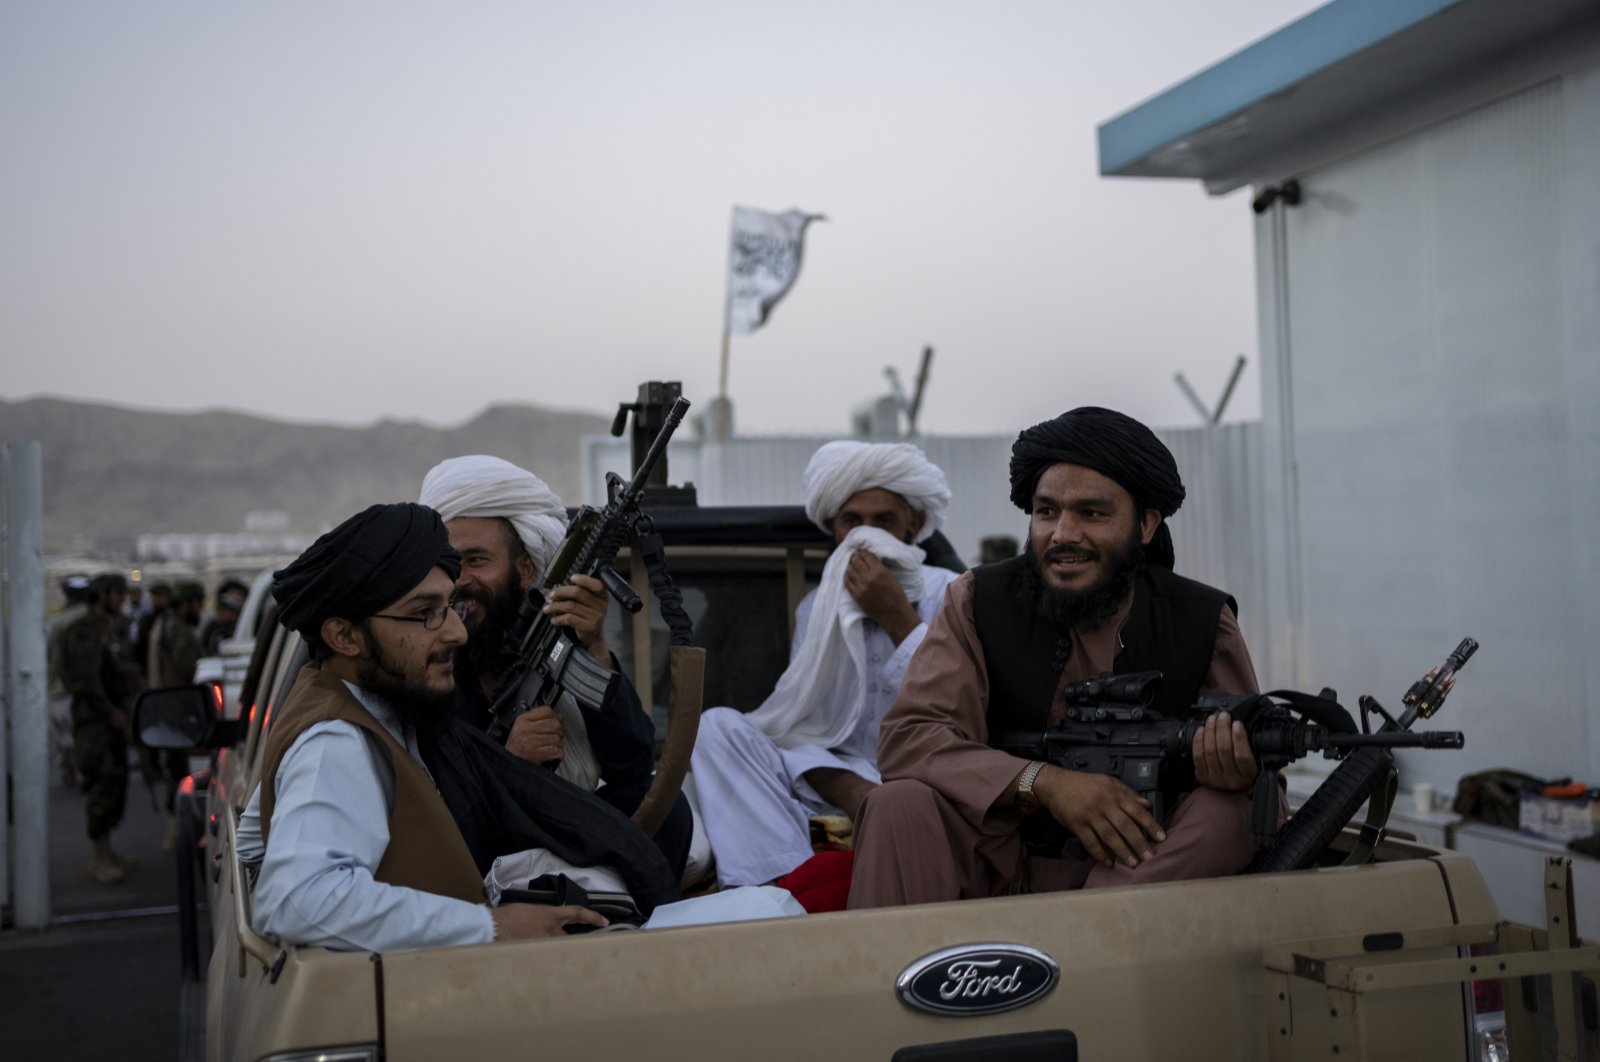 Taliban fighters sit in a pickup truck at the airport in Kabul, Afghanistan, Sept. 9, 2021. (AP Photo)